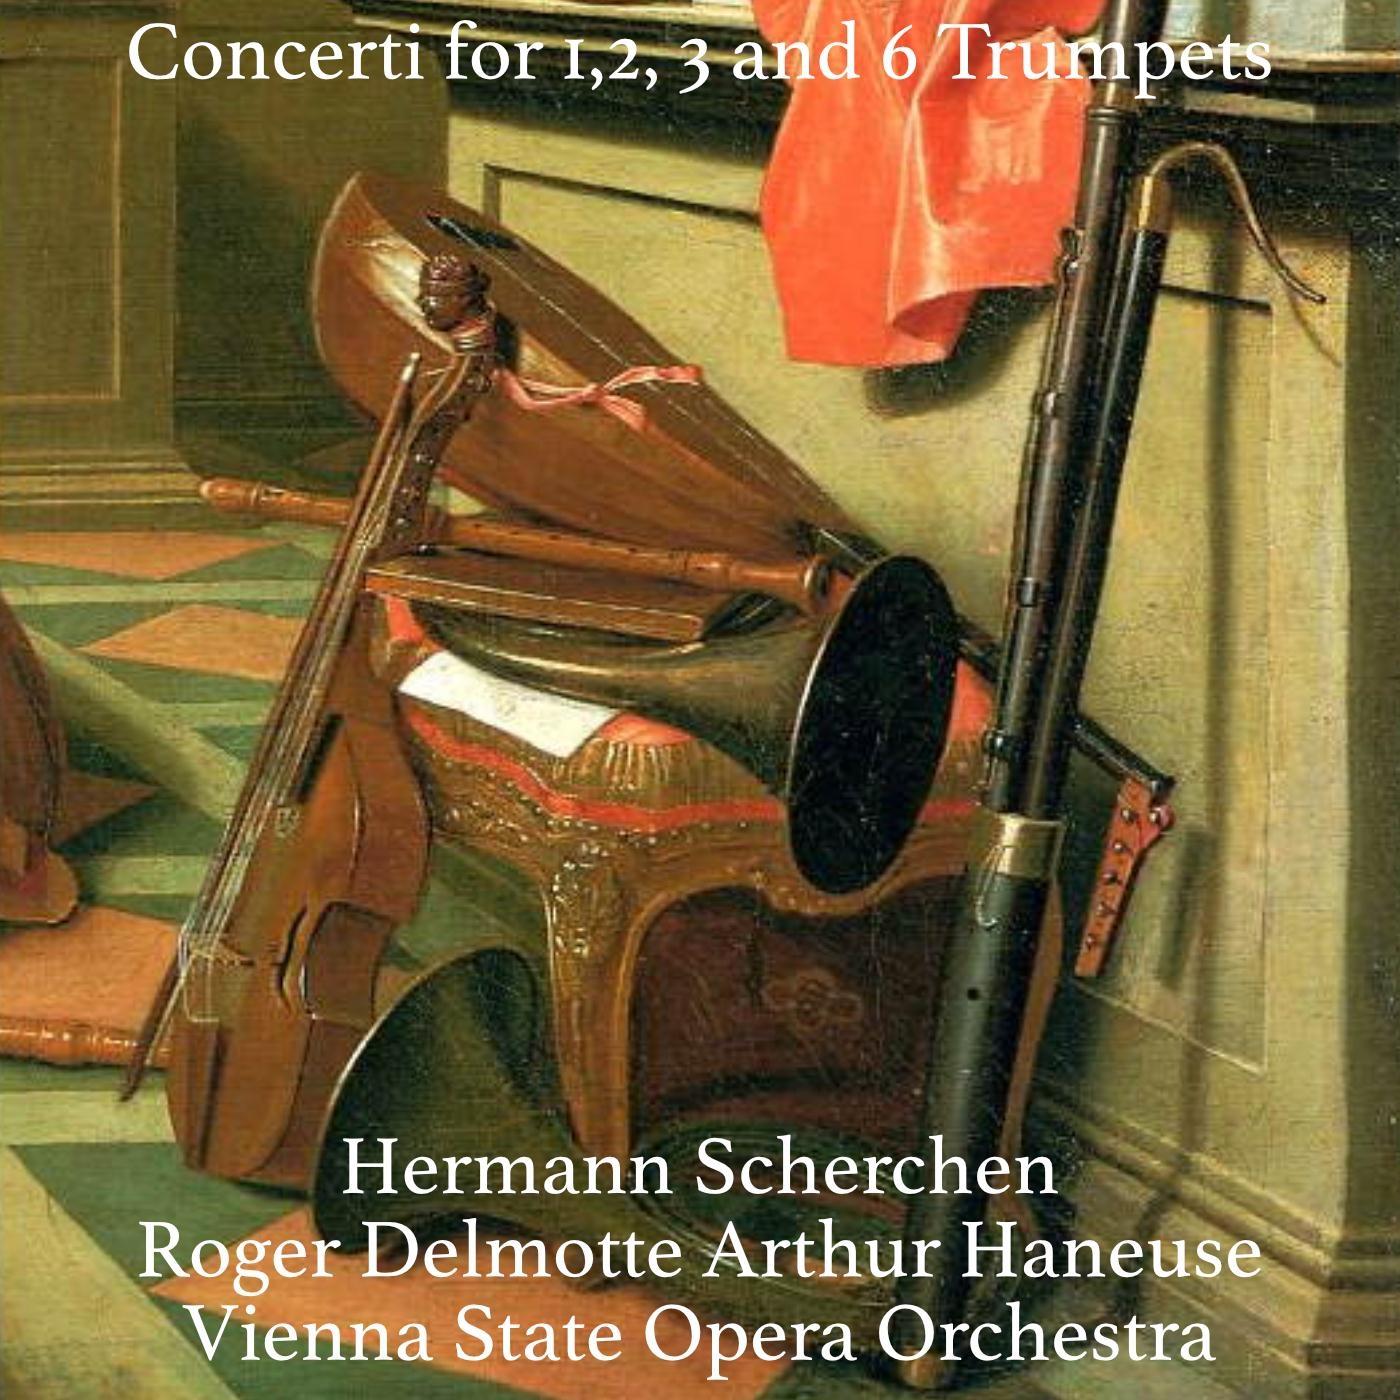 Concerto in D Major for 2 Trumpets and Strings Orchestra with Harpsichord and Organ, IFM 1: II. Largo